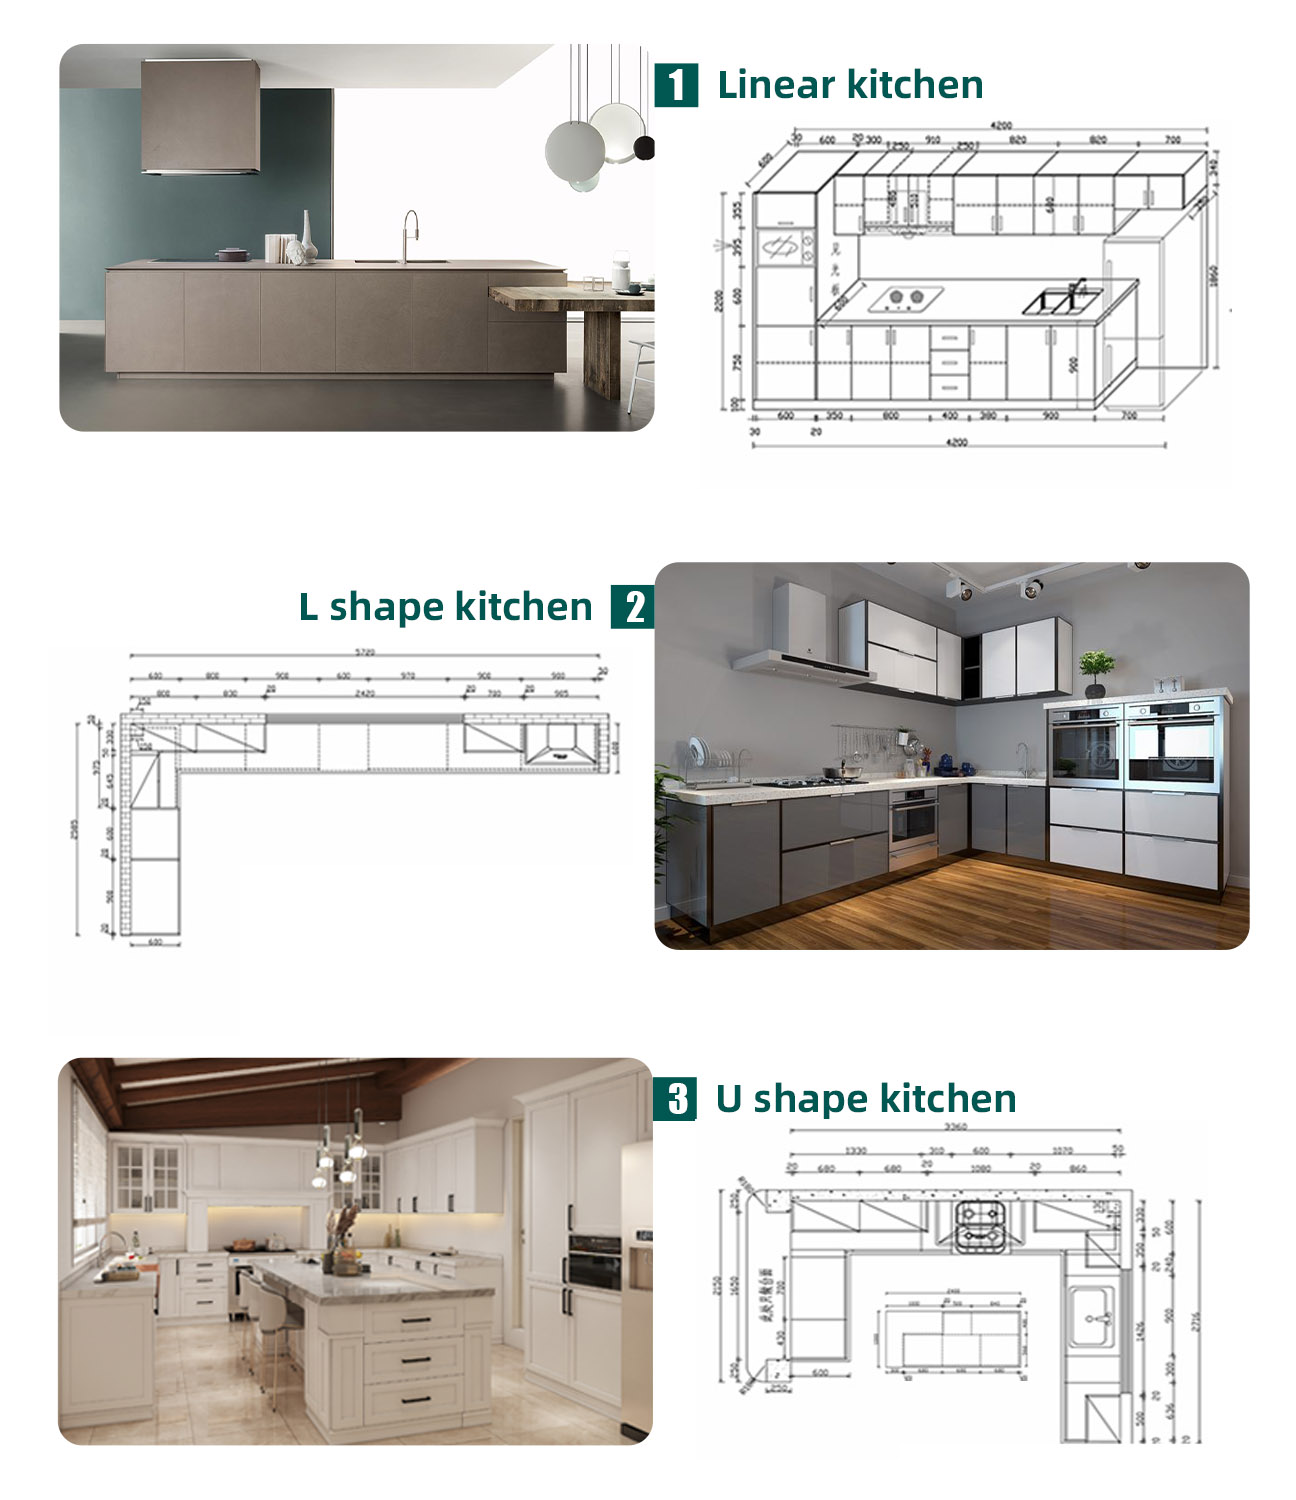 Cabinet design knowledge you must know